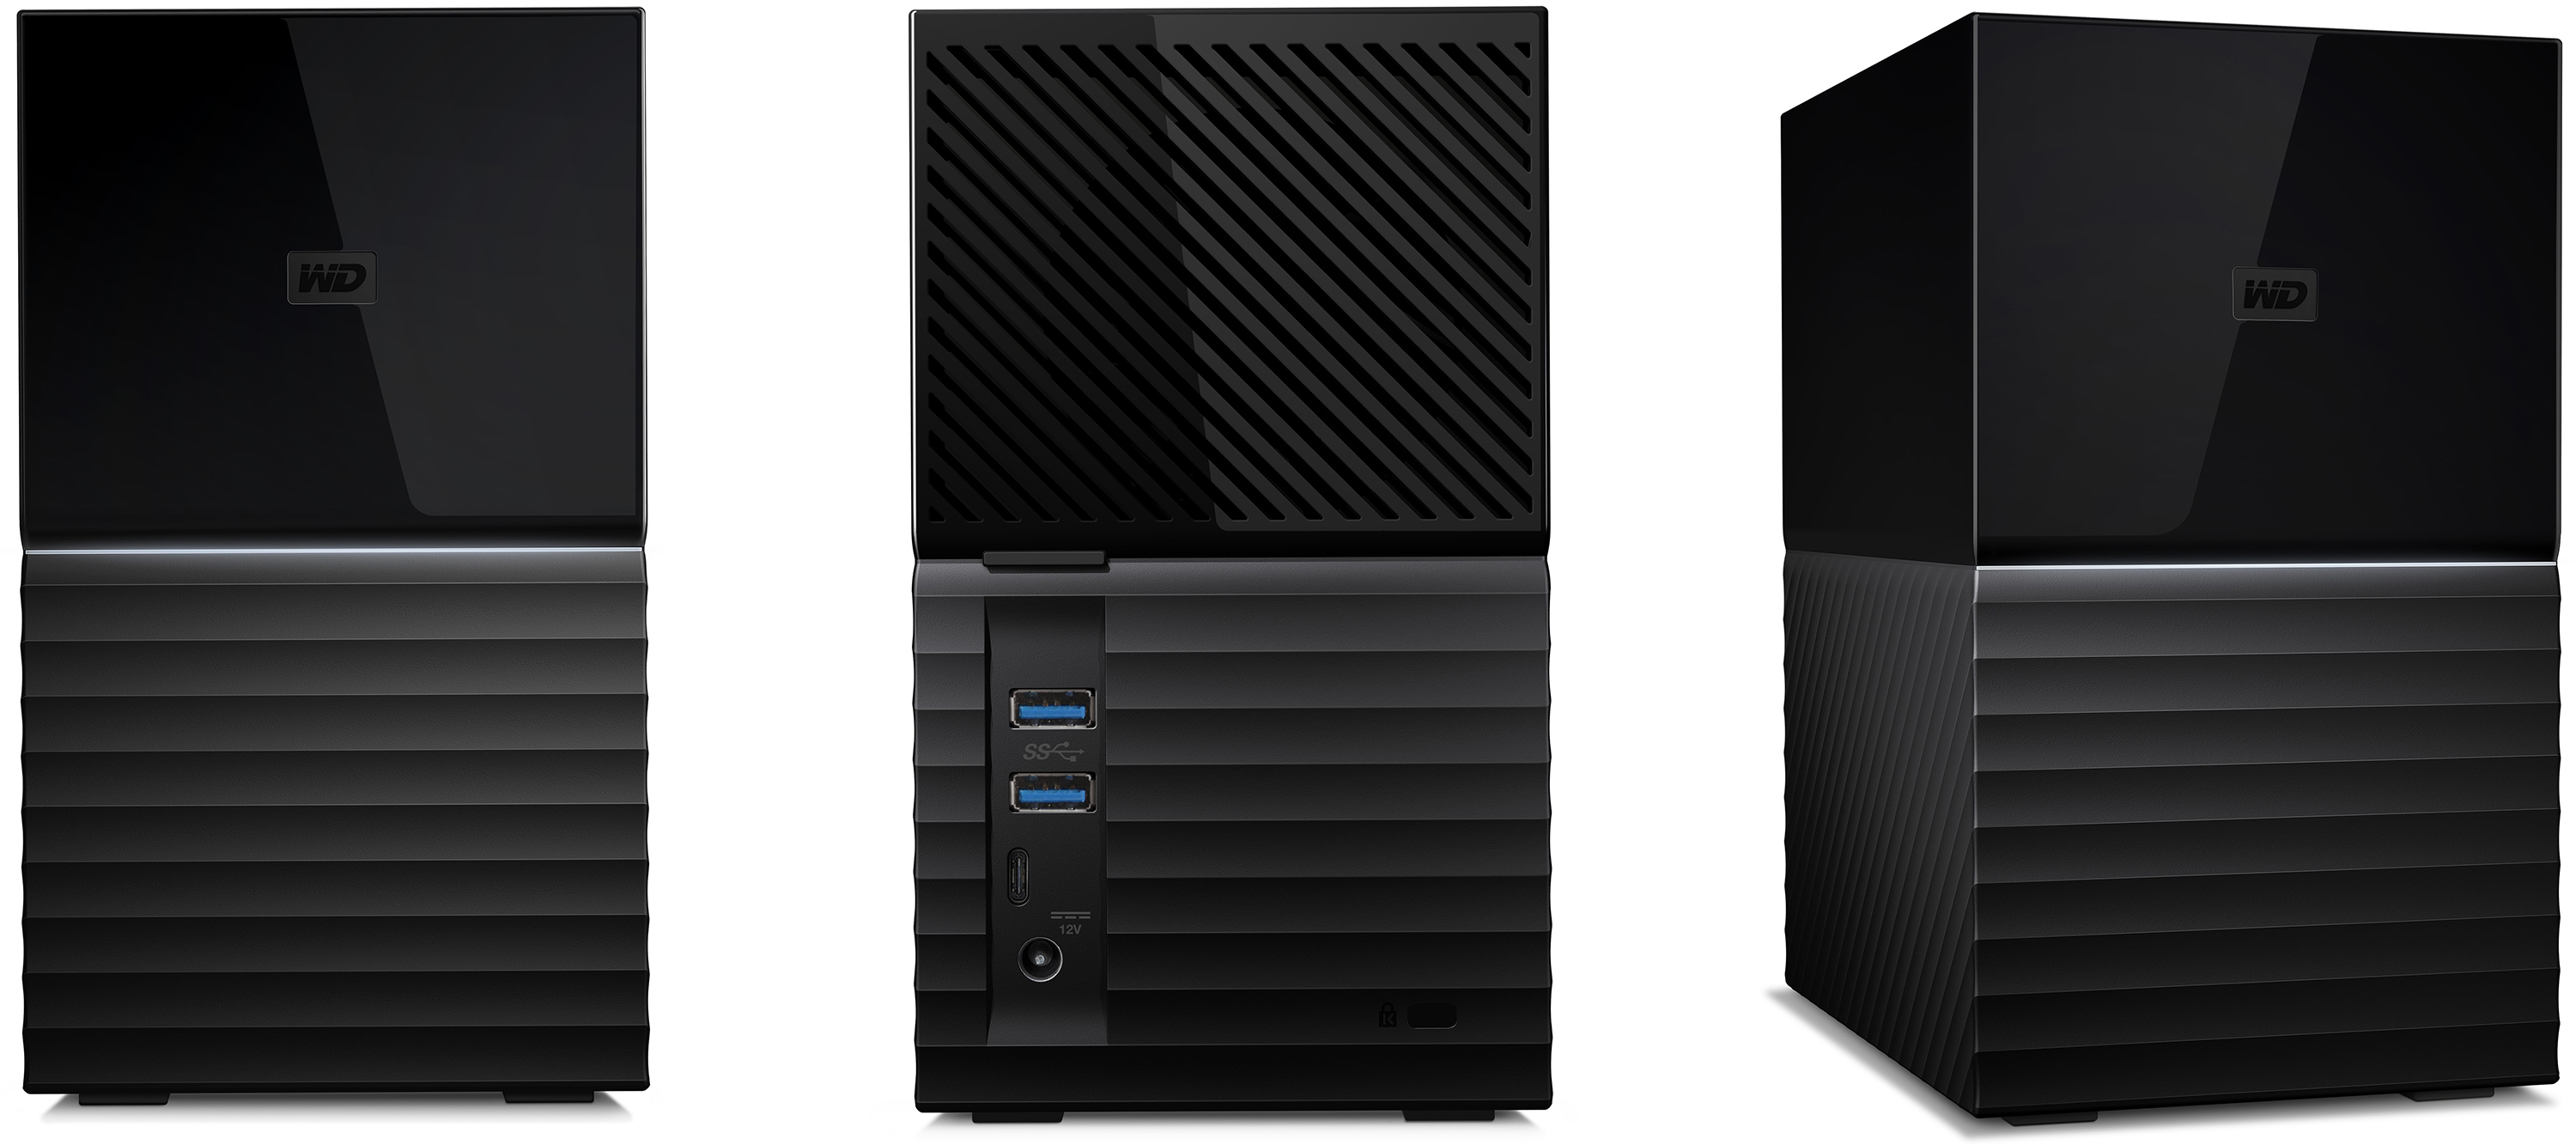 Western Digital Launches New My Book Duo Storage Systems: 360 MB/s 